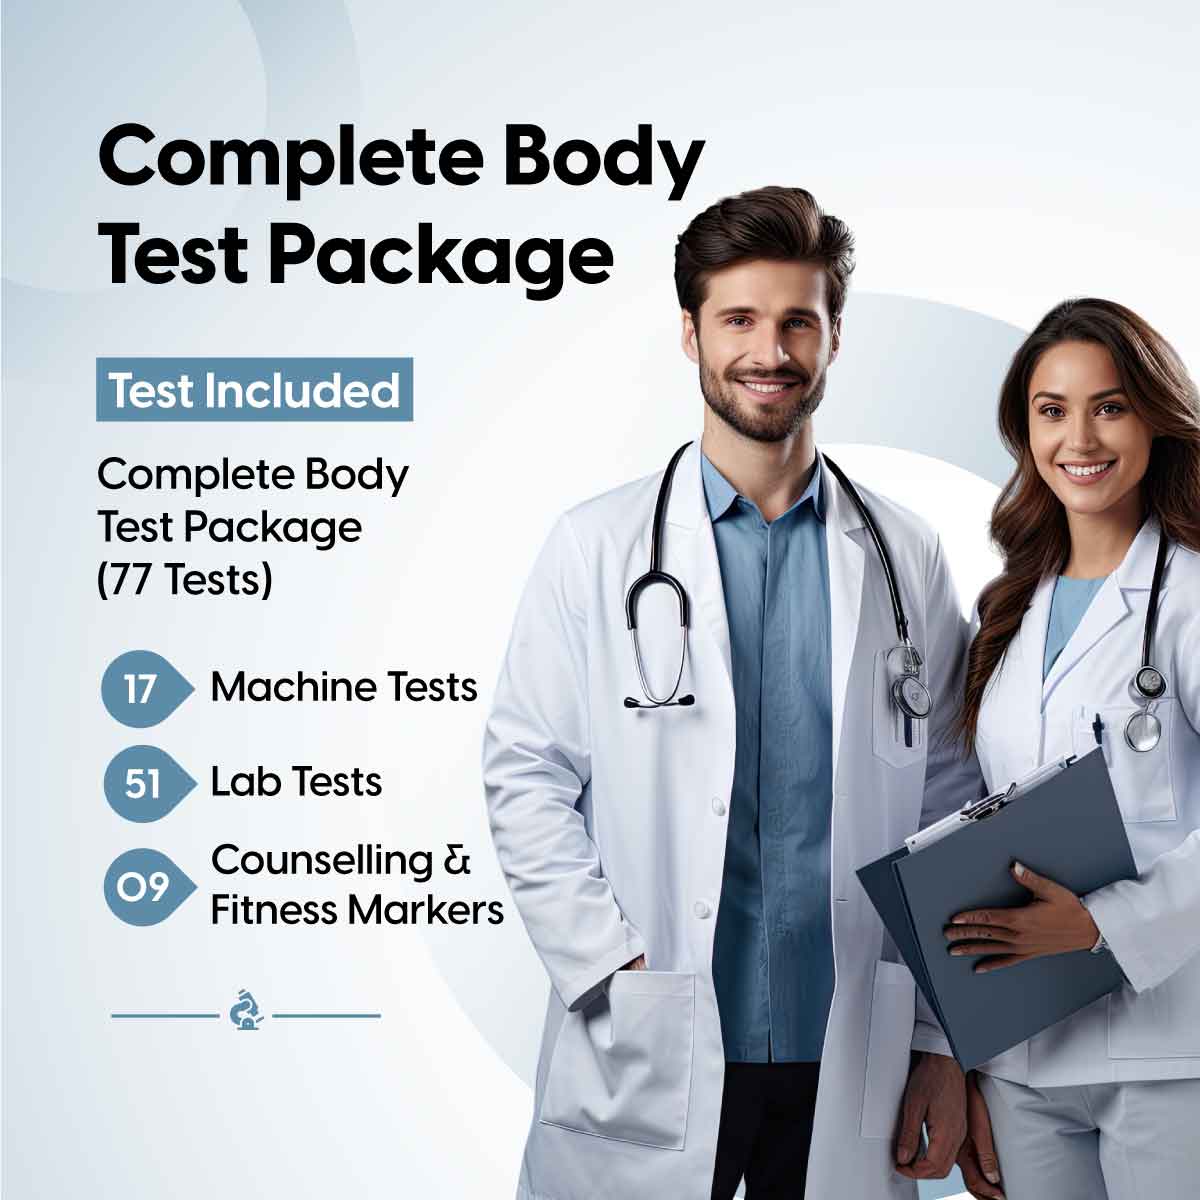 Complete Body Test Package